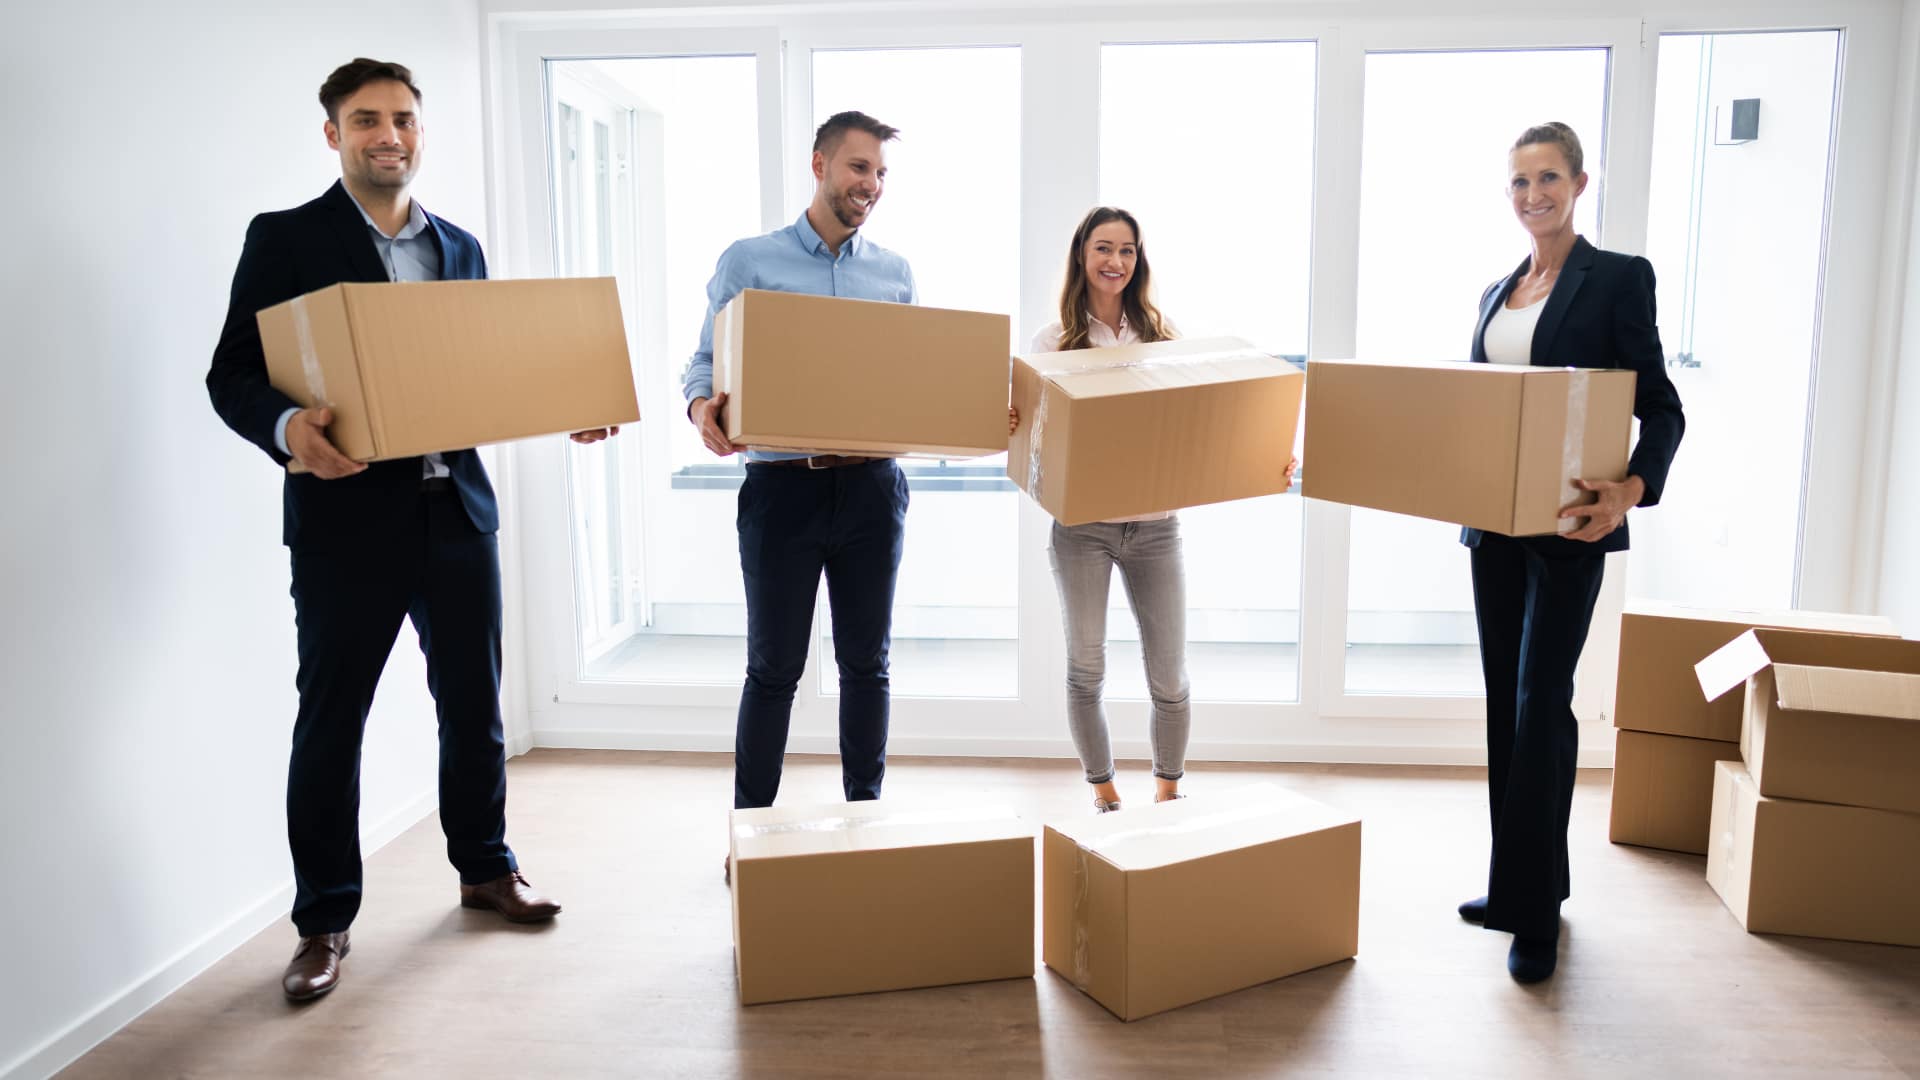 A group of coworkers holding boxes in a new office